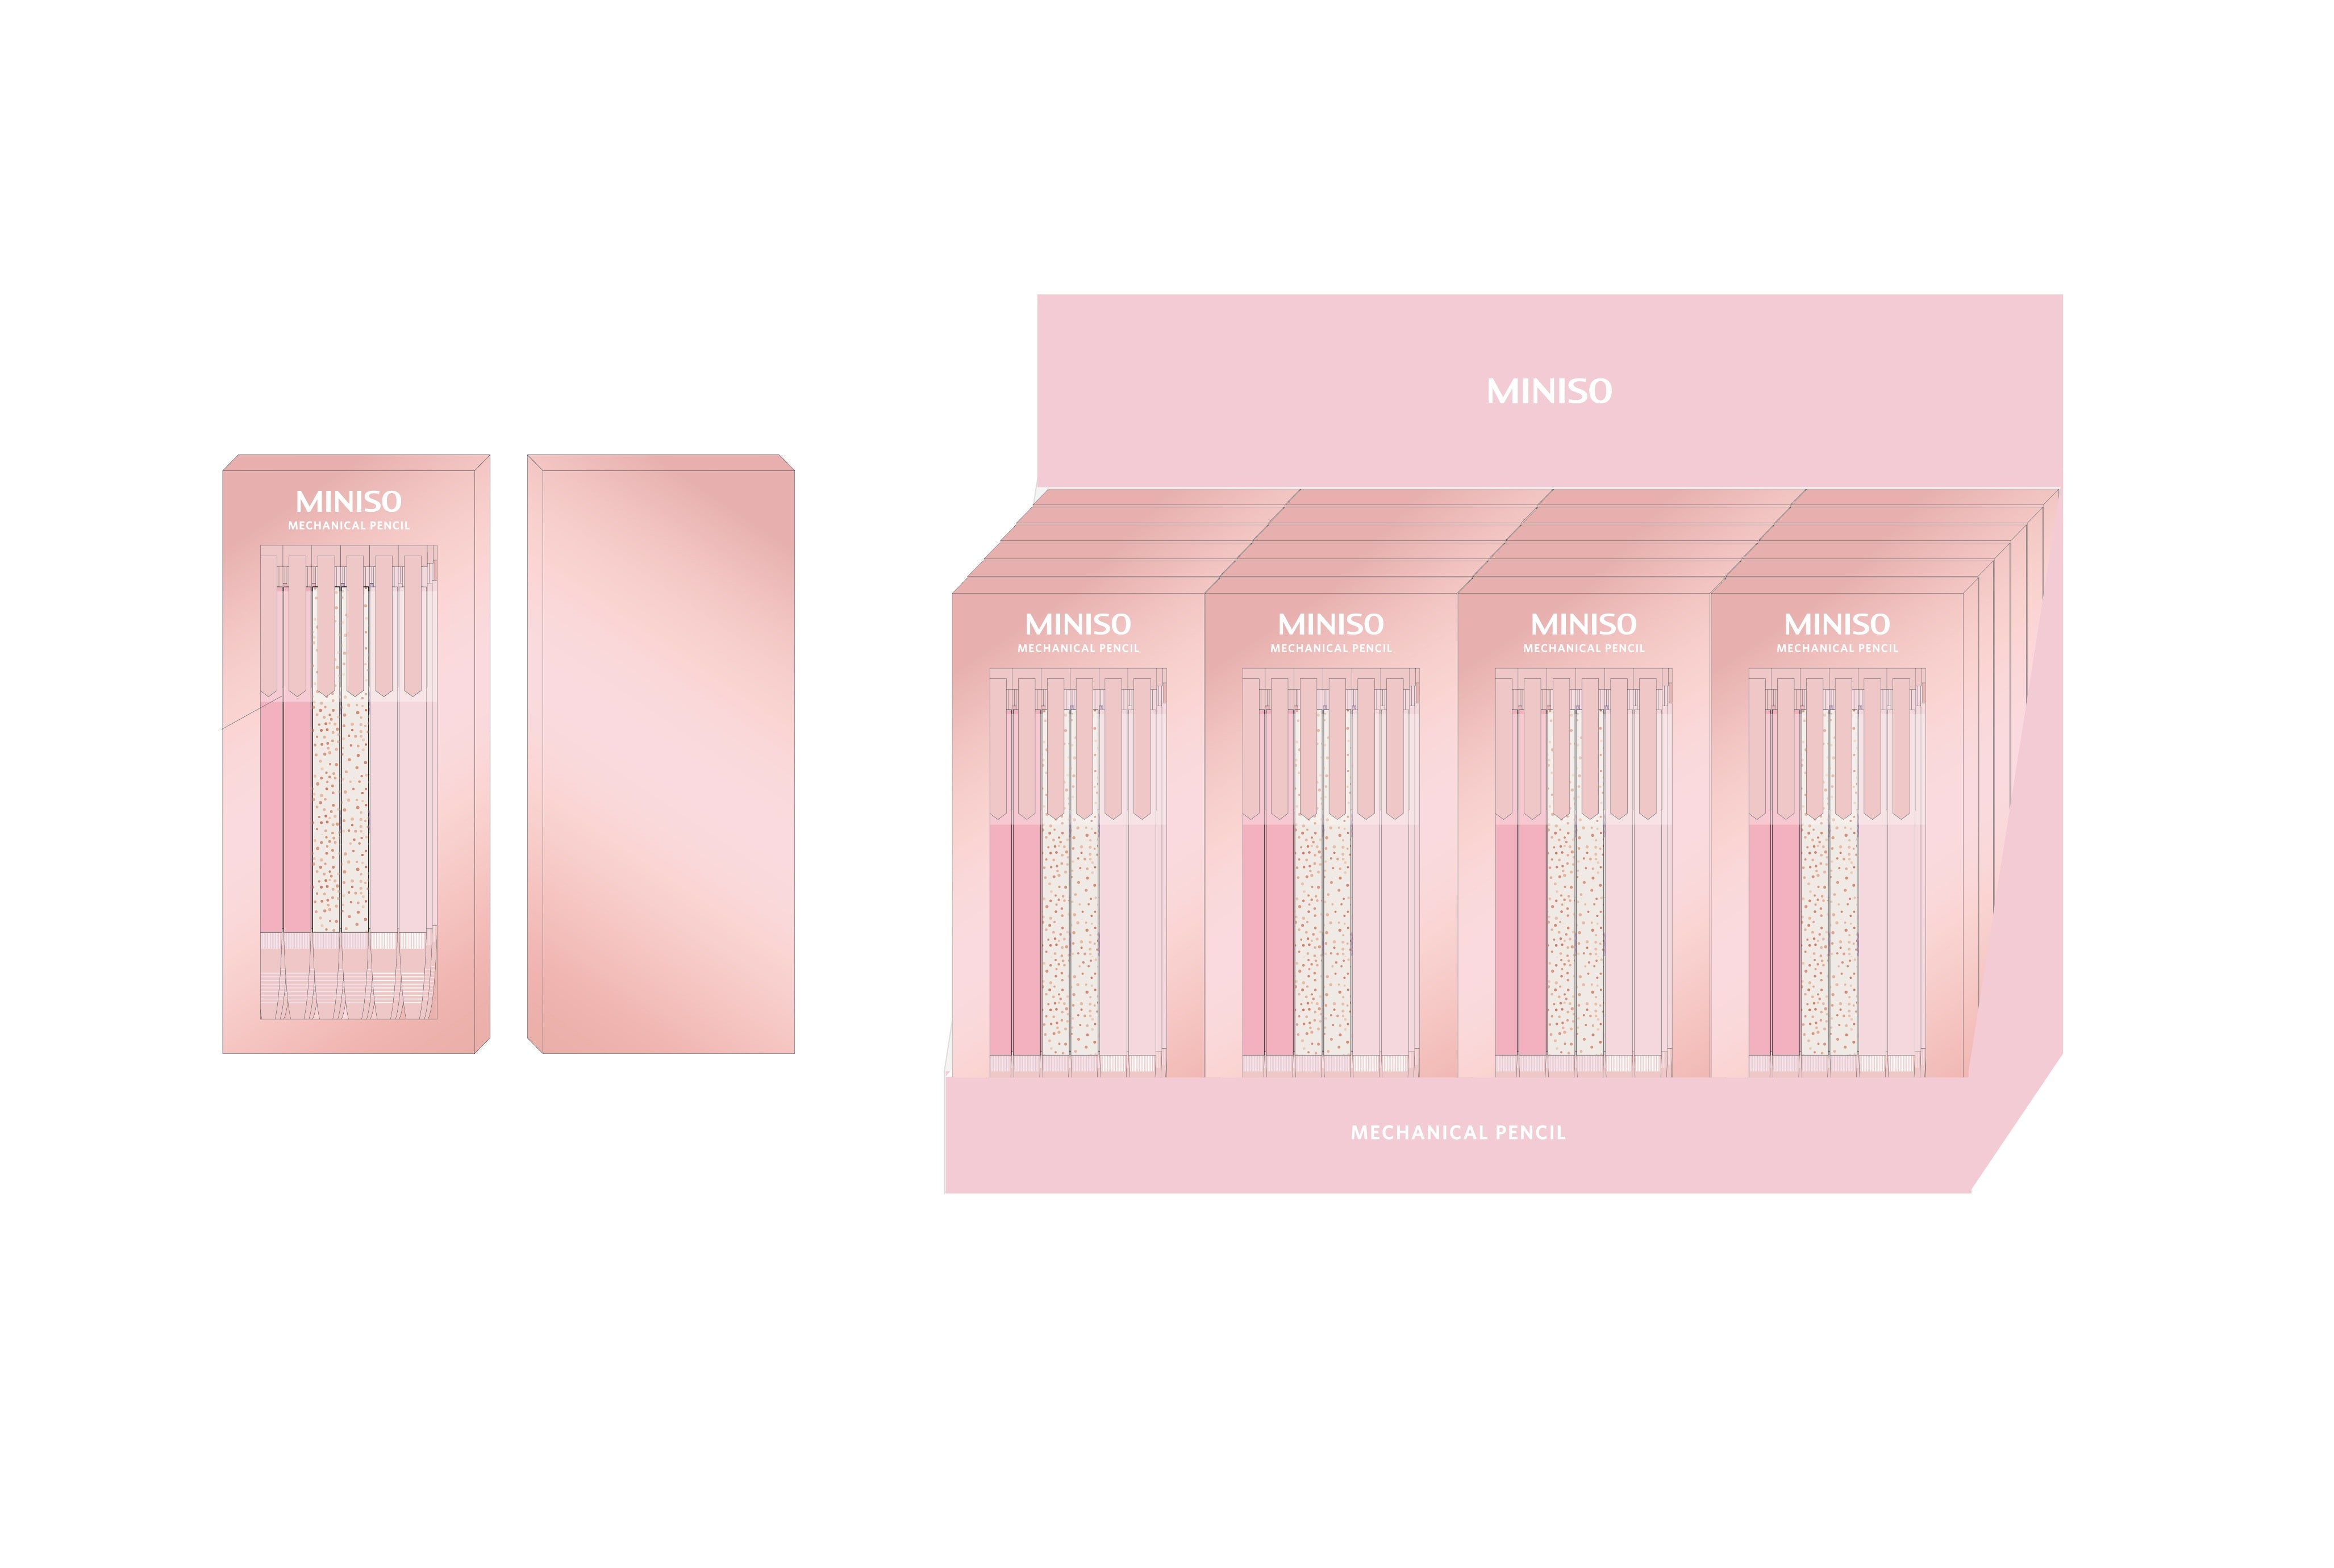 MINISO SÉRIE OR ROSE ENSEMBLE PORTE-MINE 12 PIÈCES 2015285910102 STATIONERY & GIFT